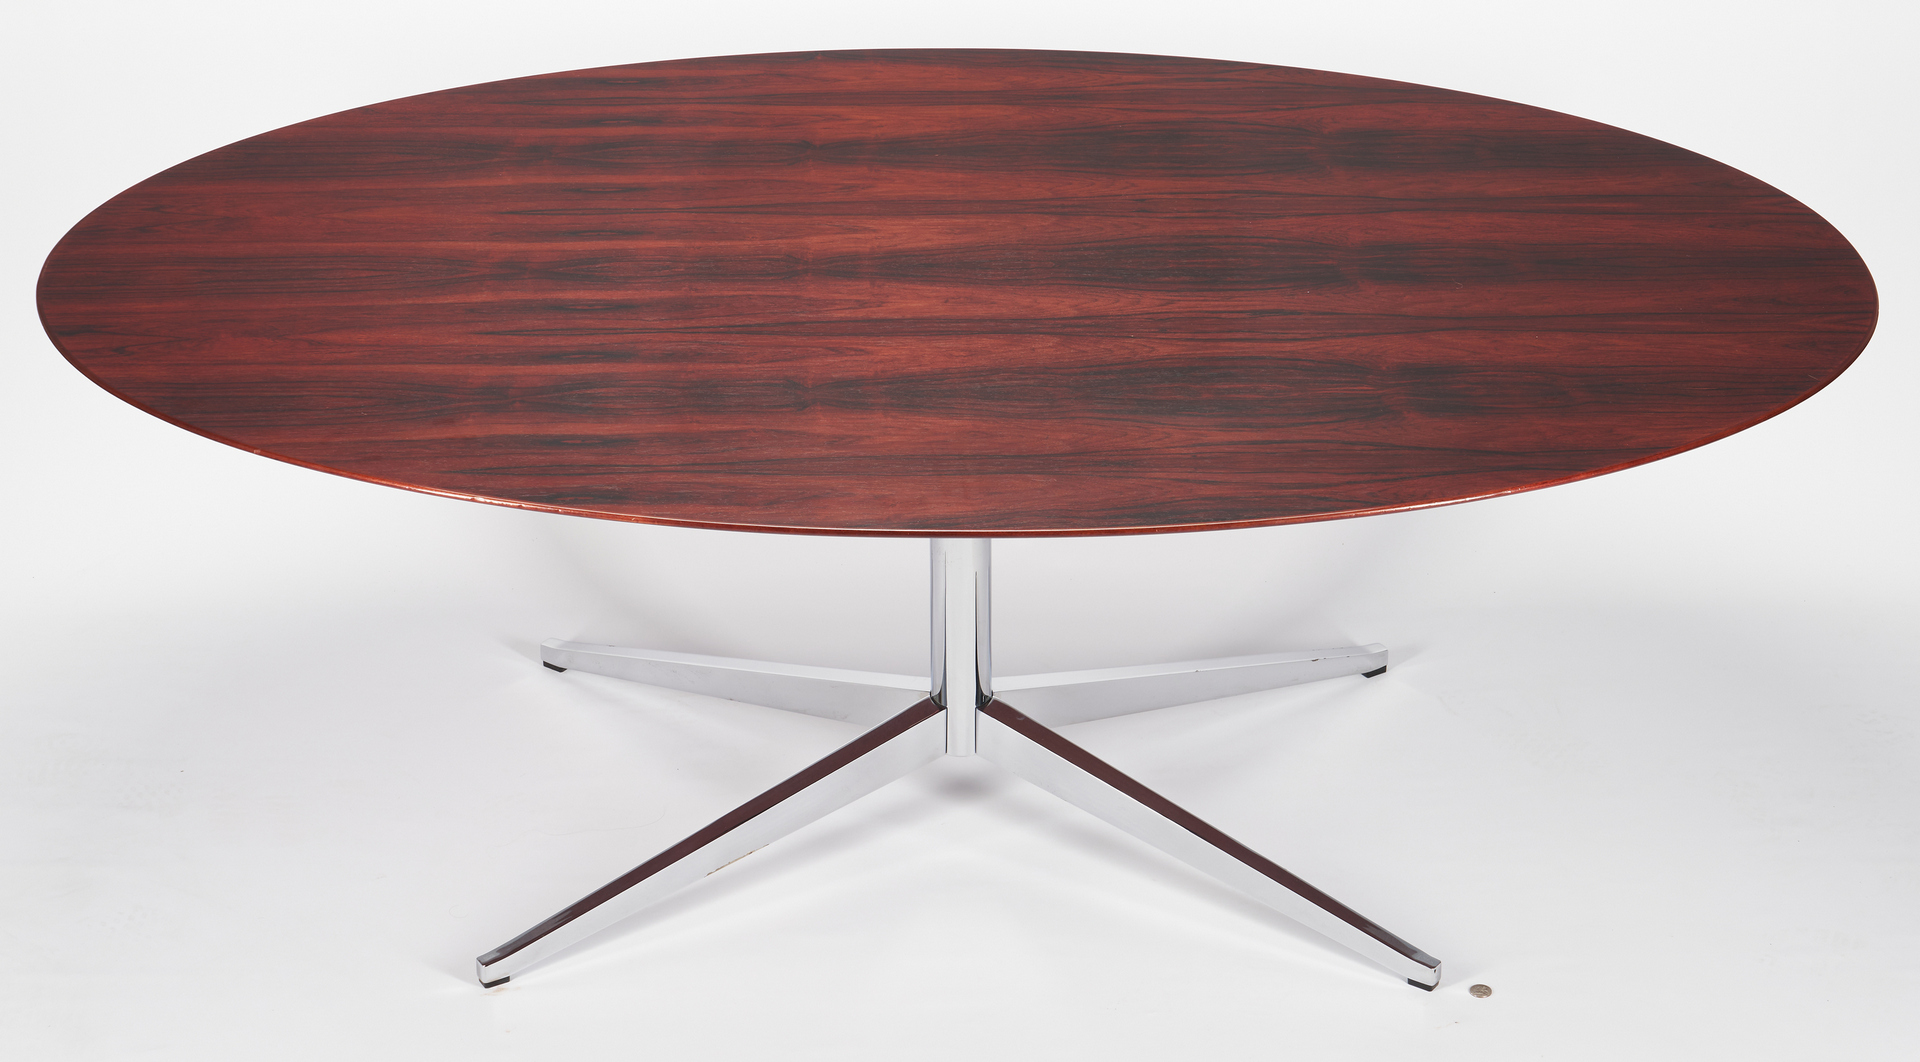 Lot 597: Mid-Century Florence Knoll Oval Table Desk